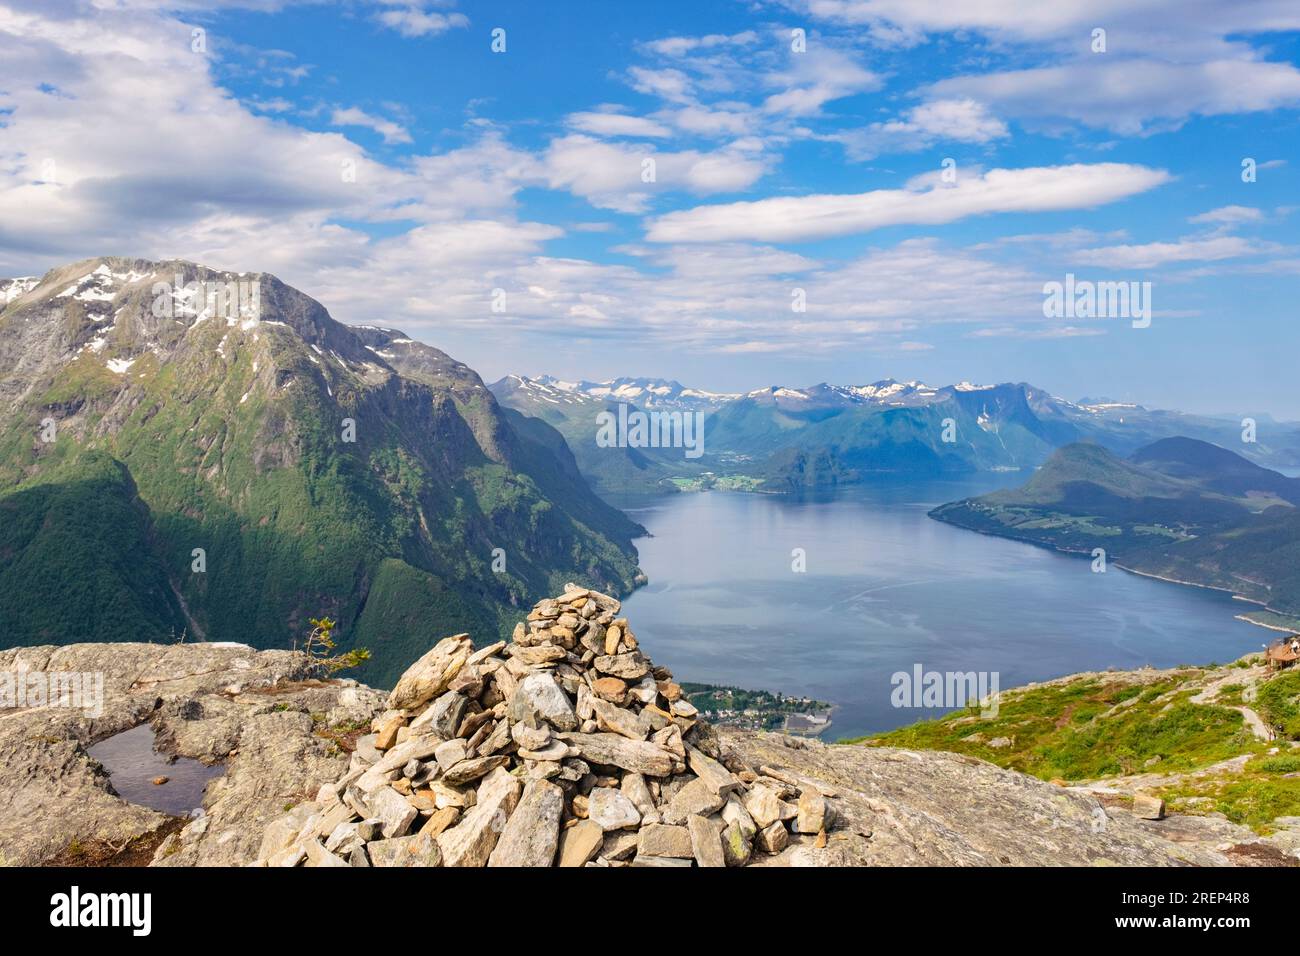 High view to Romsdalsfjorden from Nesaksla mountain. Andalsnes, Møre og Romsdal county, Norway, Scandinavia, Europe Stock Photo